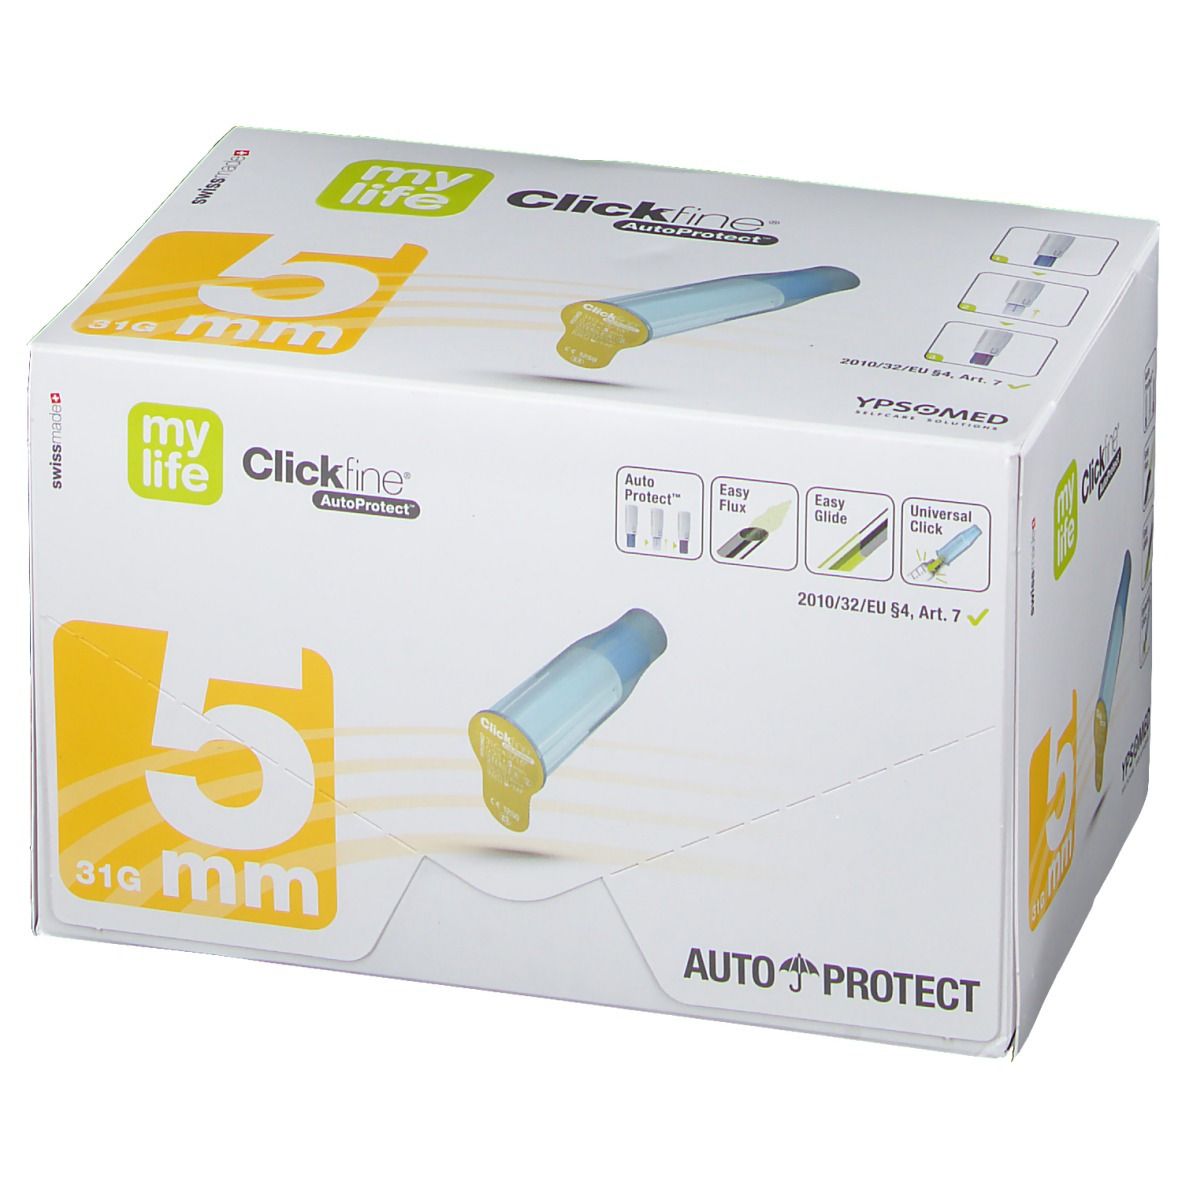 mylife Clickfine® AutoProtect 5 mm